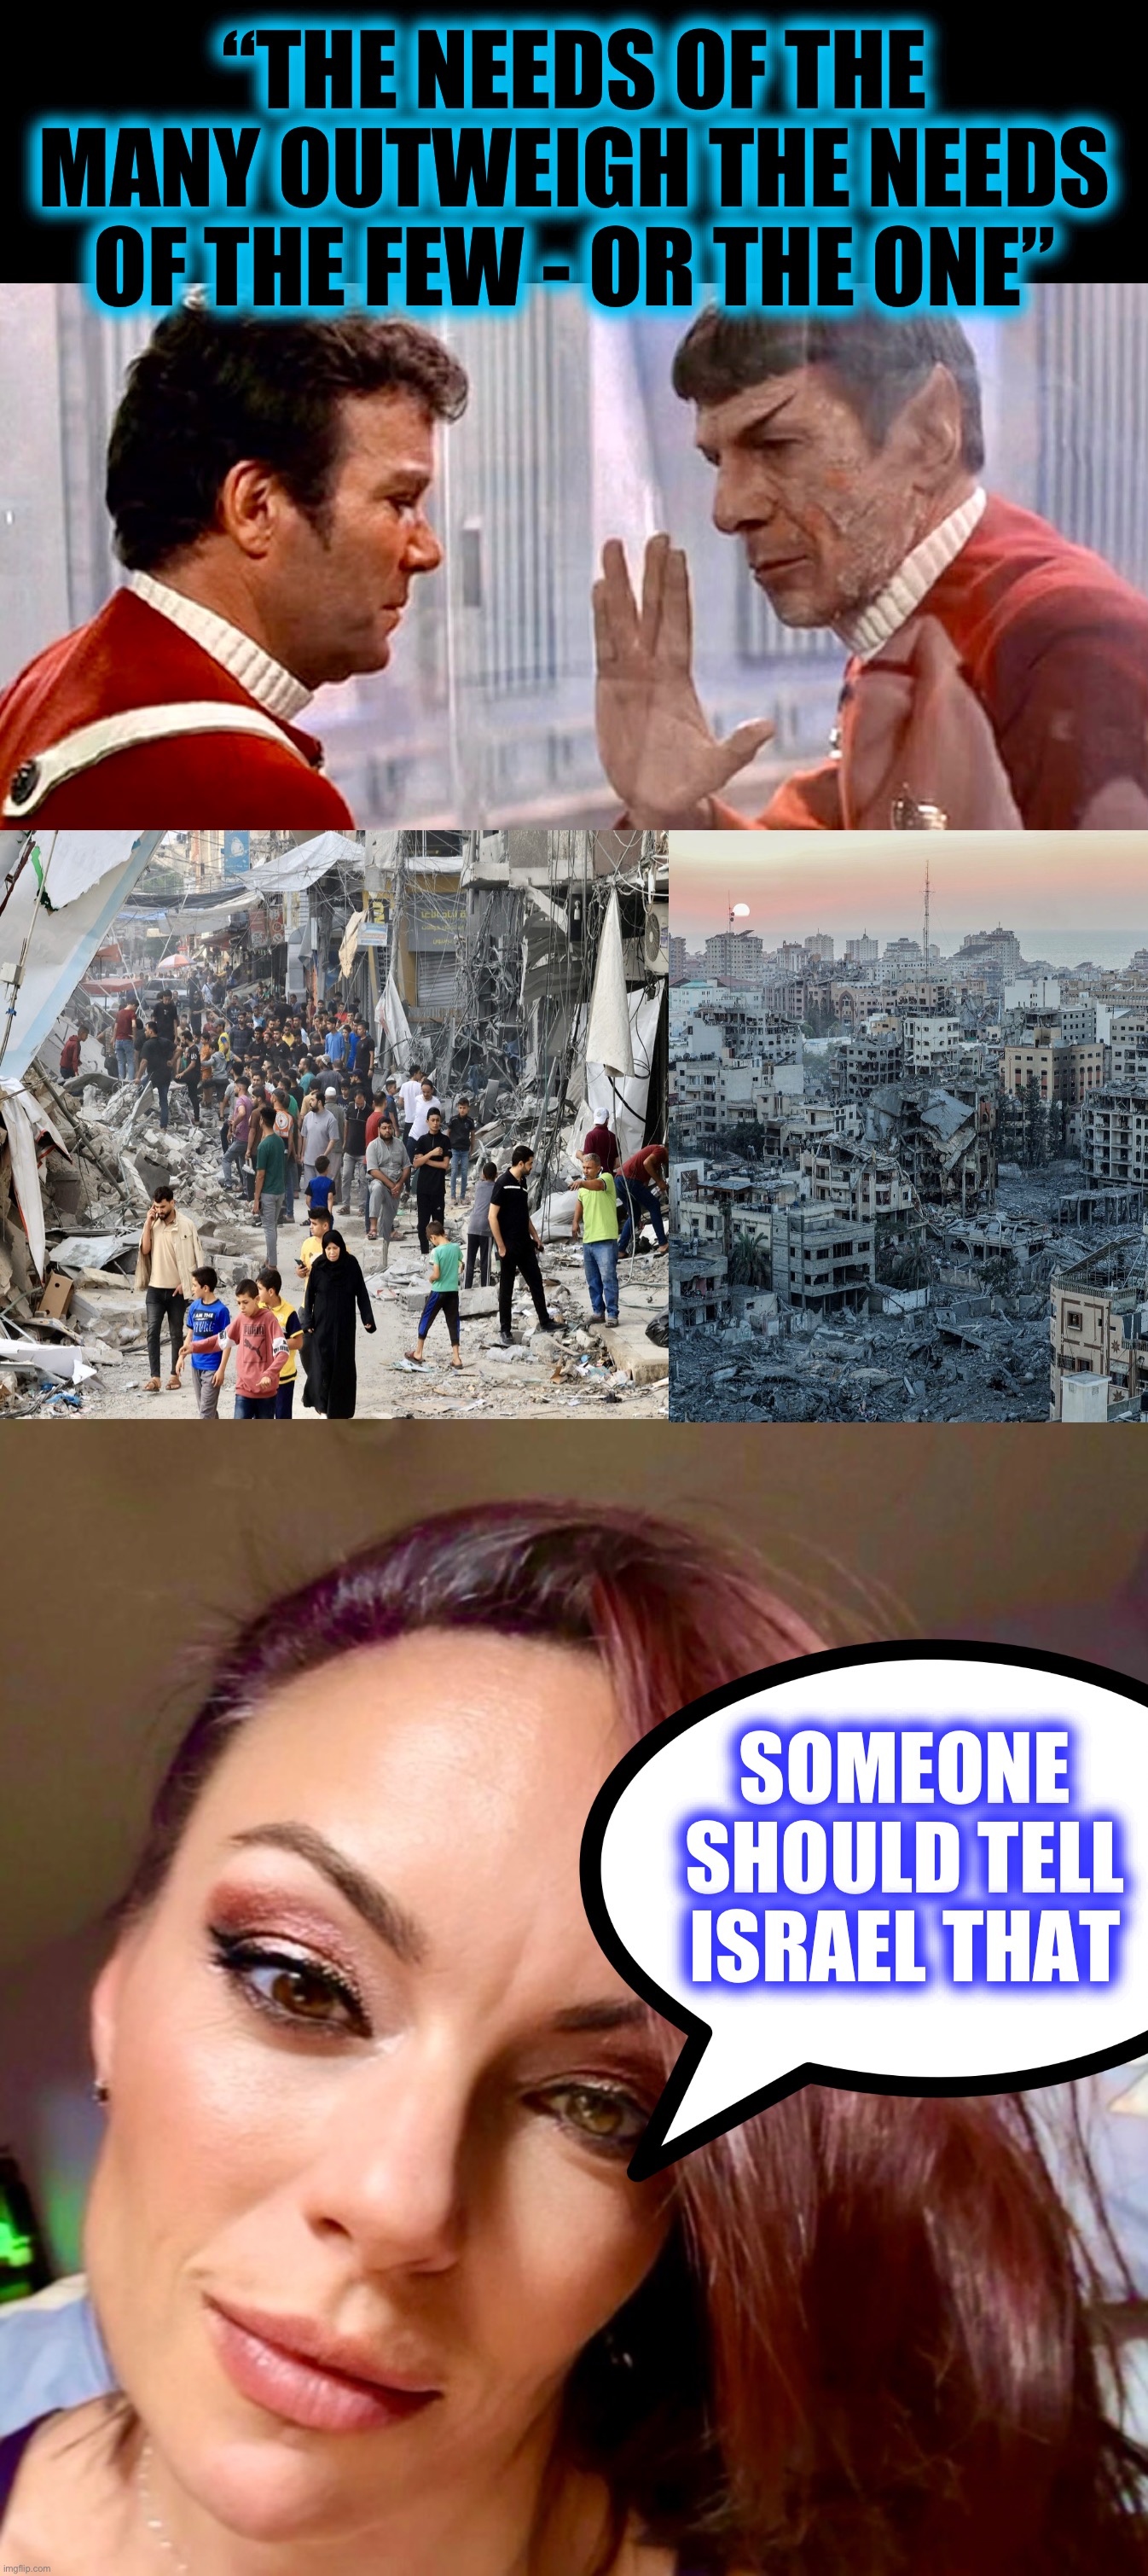 Some are more equal | “THE NEEDS OF THE MANY OUTWEIGH THE NEEDS OF THE FEW - OR THE ONE”; SOMEONE SHOULD TELL ISRAEL THAT | image tagged in israel,gaza,star trek,trump for president,palestine,israel jews | made w/ Imgflip meme maker